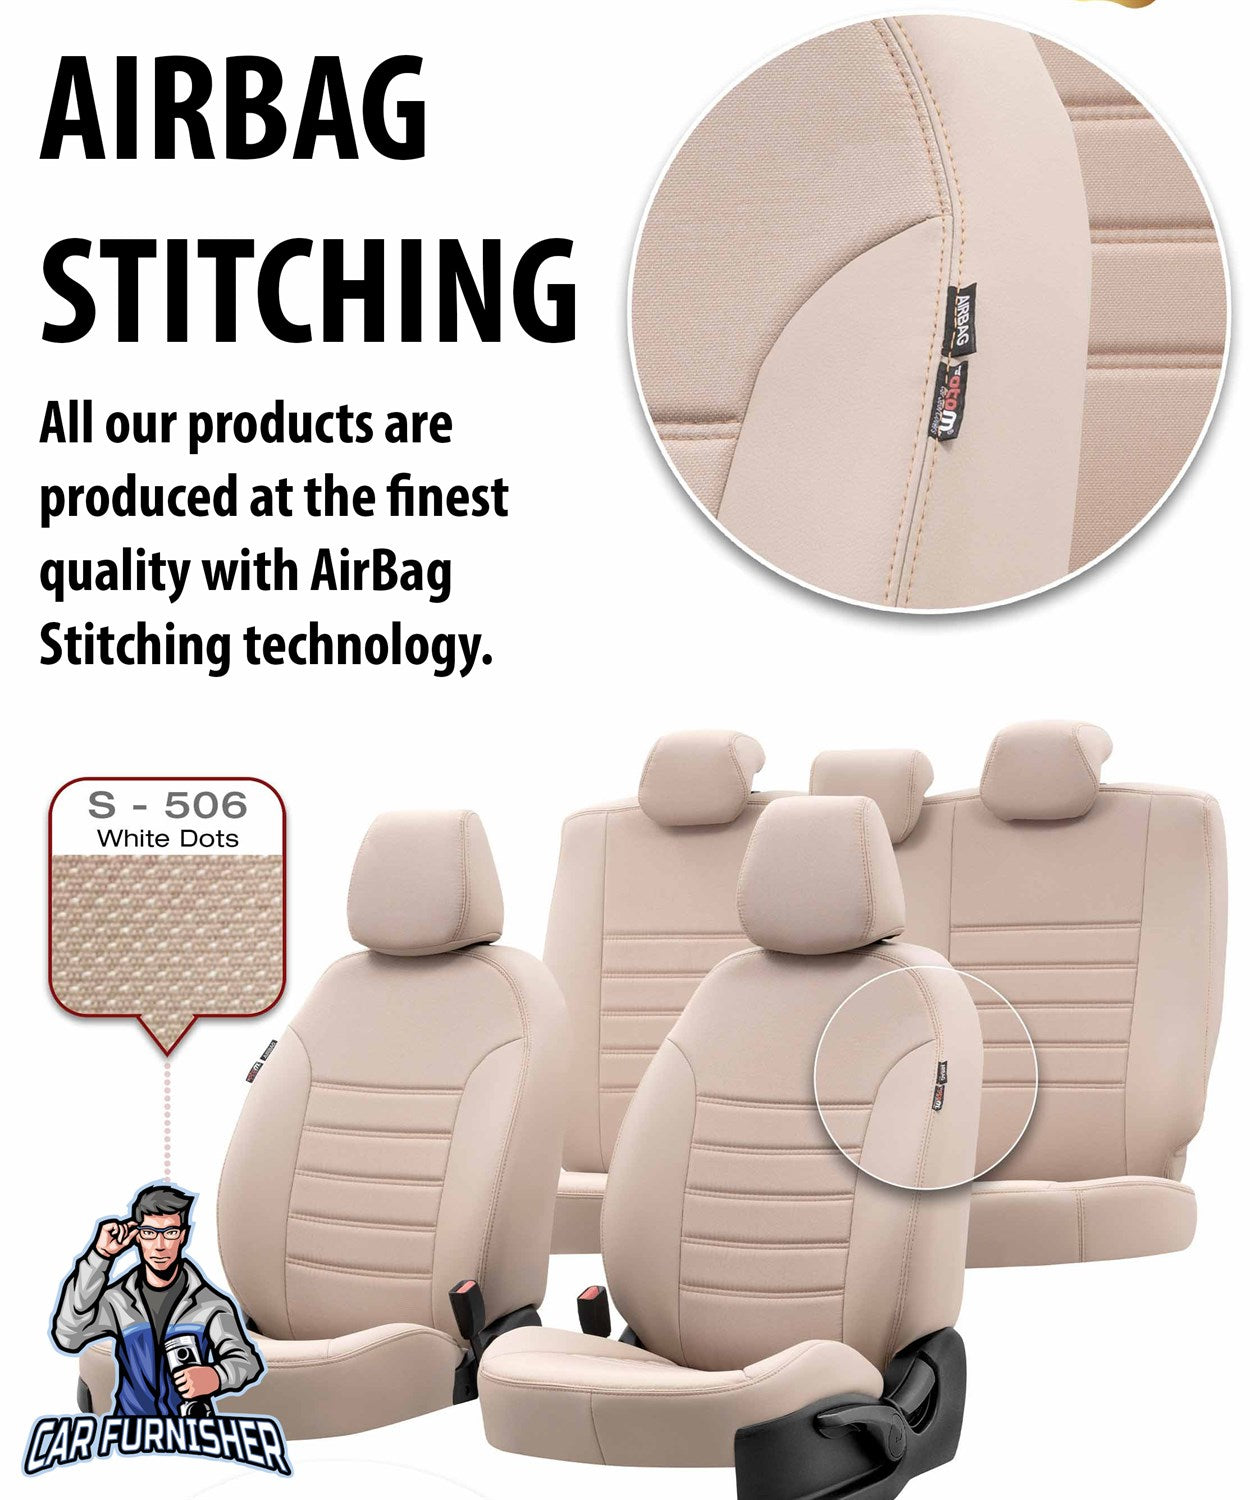 Iveco Daily Seat Covers Paris Leather & Jacquard Design Gray Leather & Jacquard Fabric